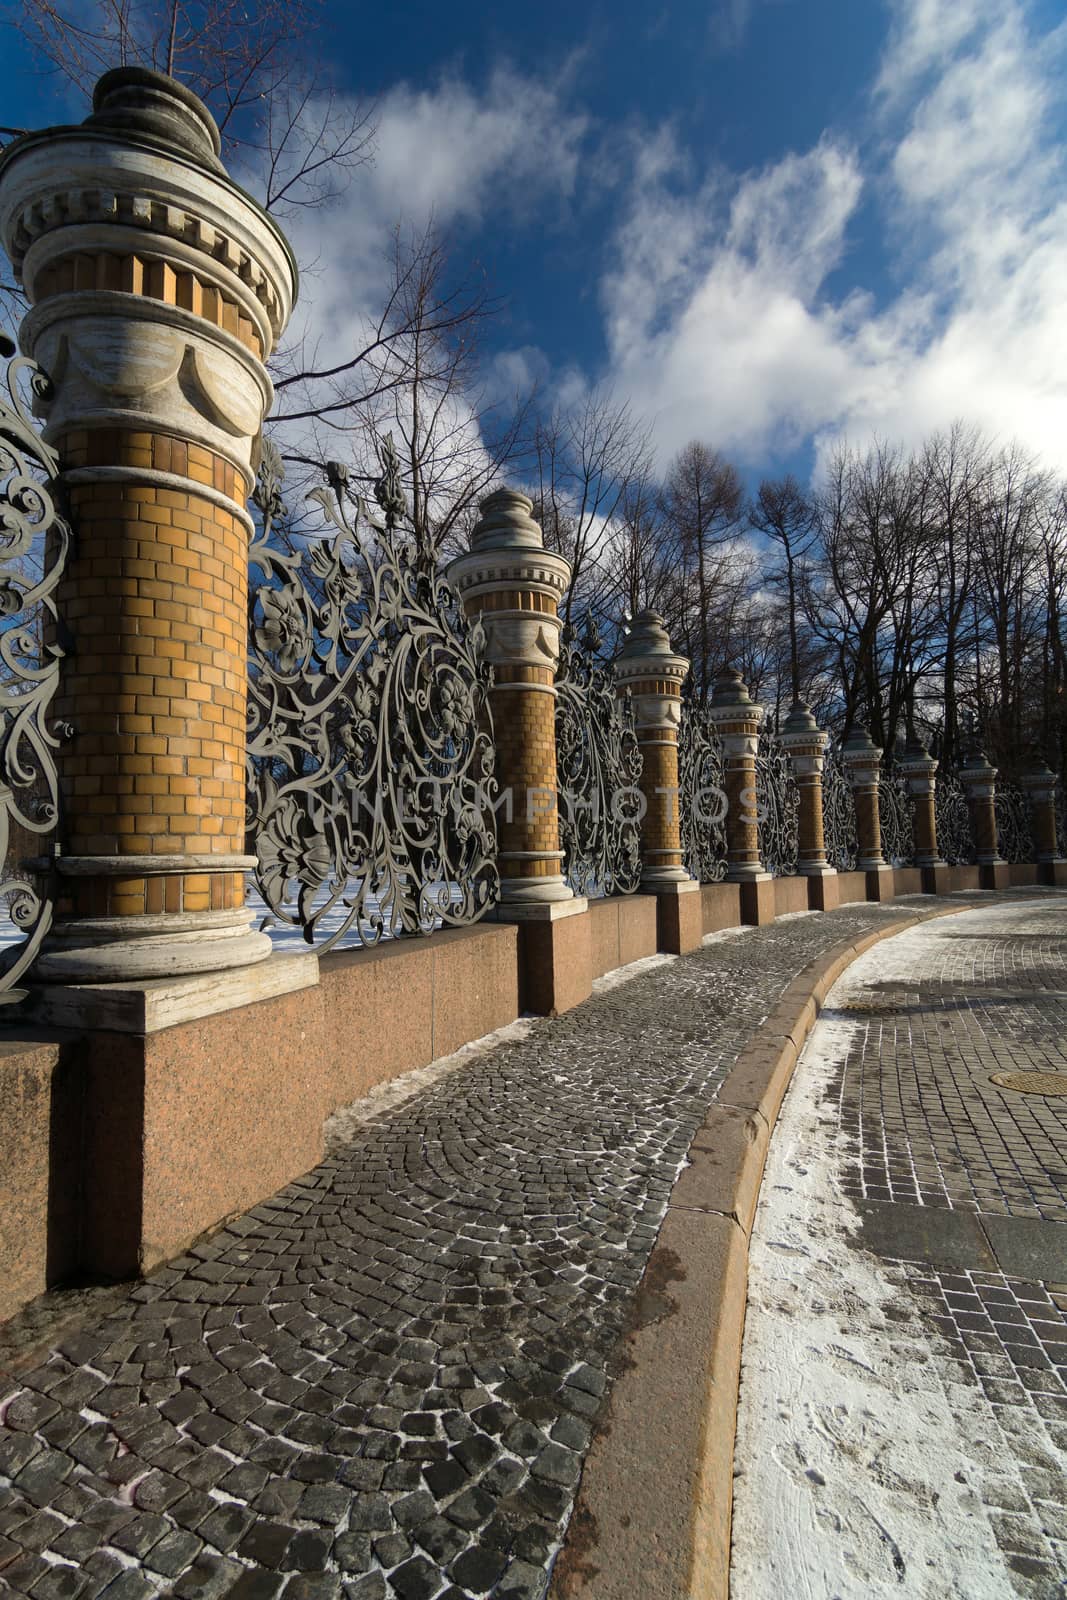 The fence of the Summer Garden in St. Petersburg